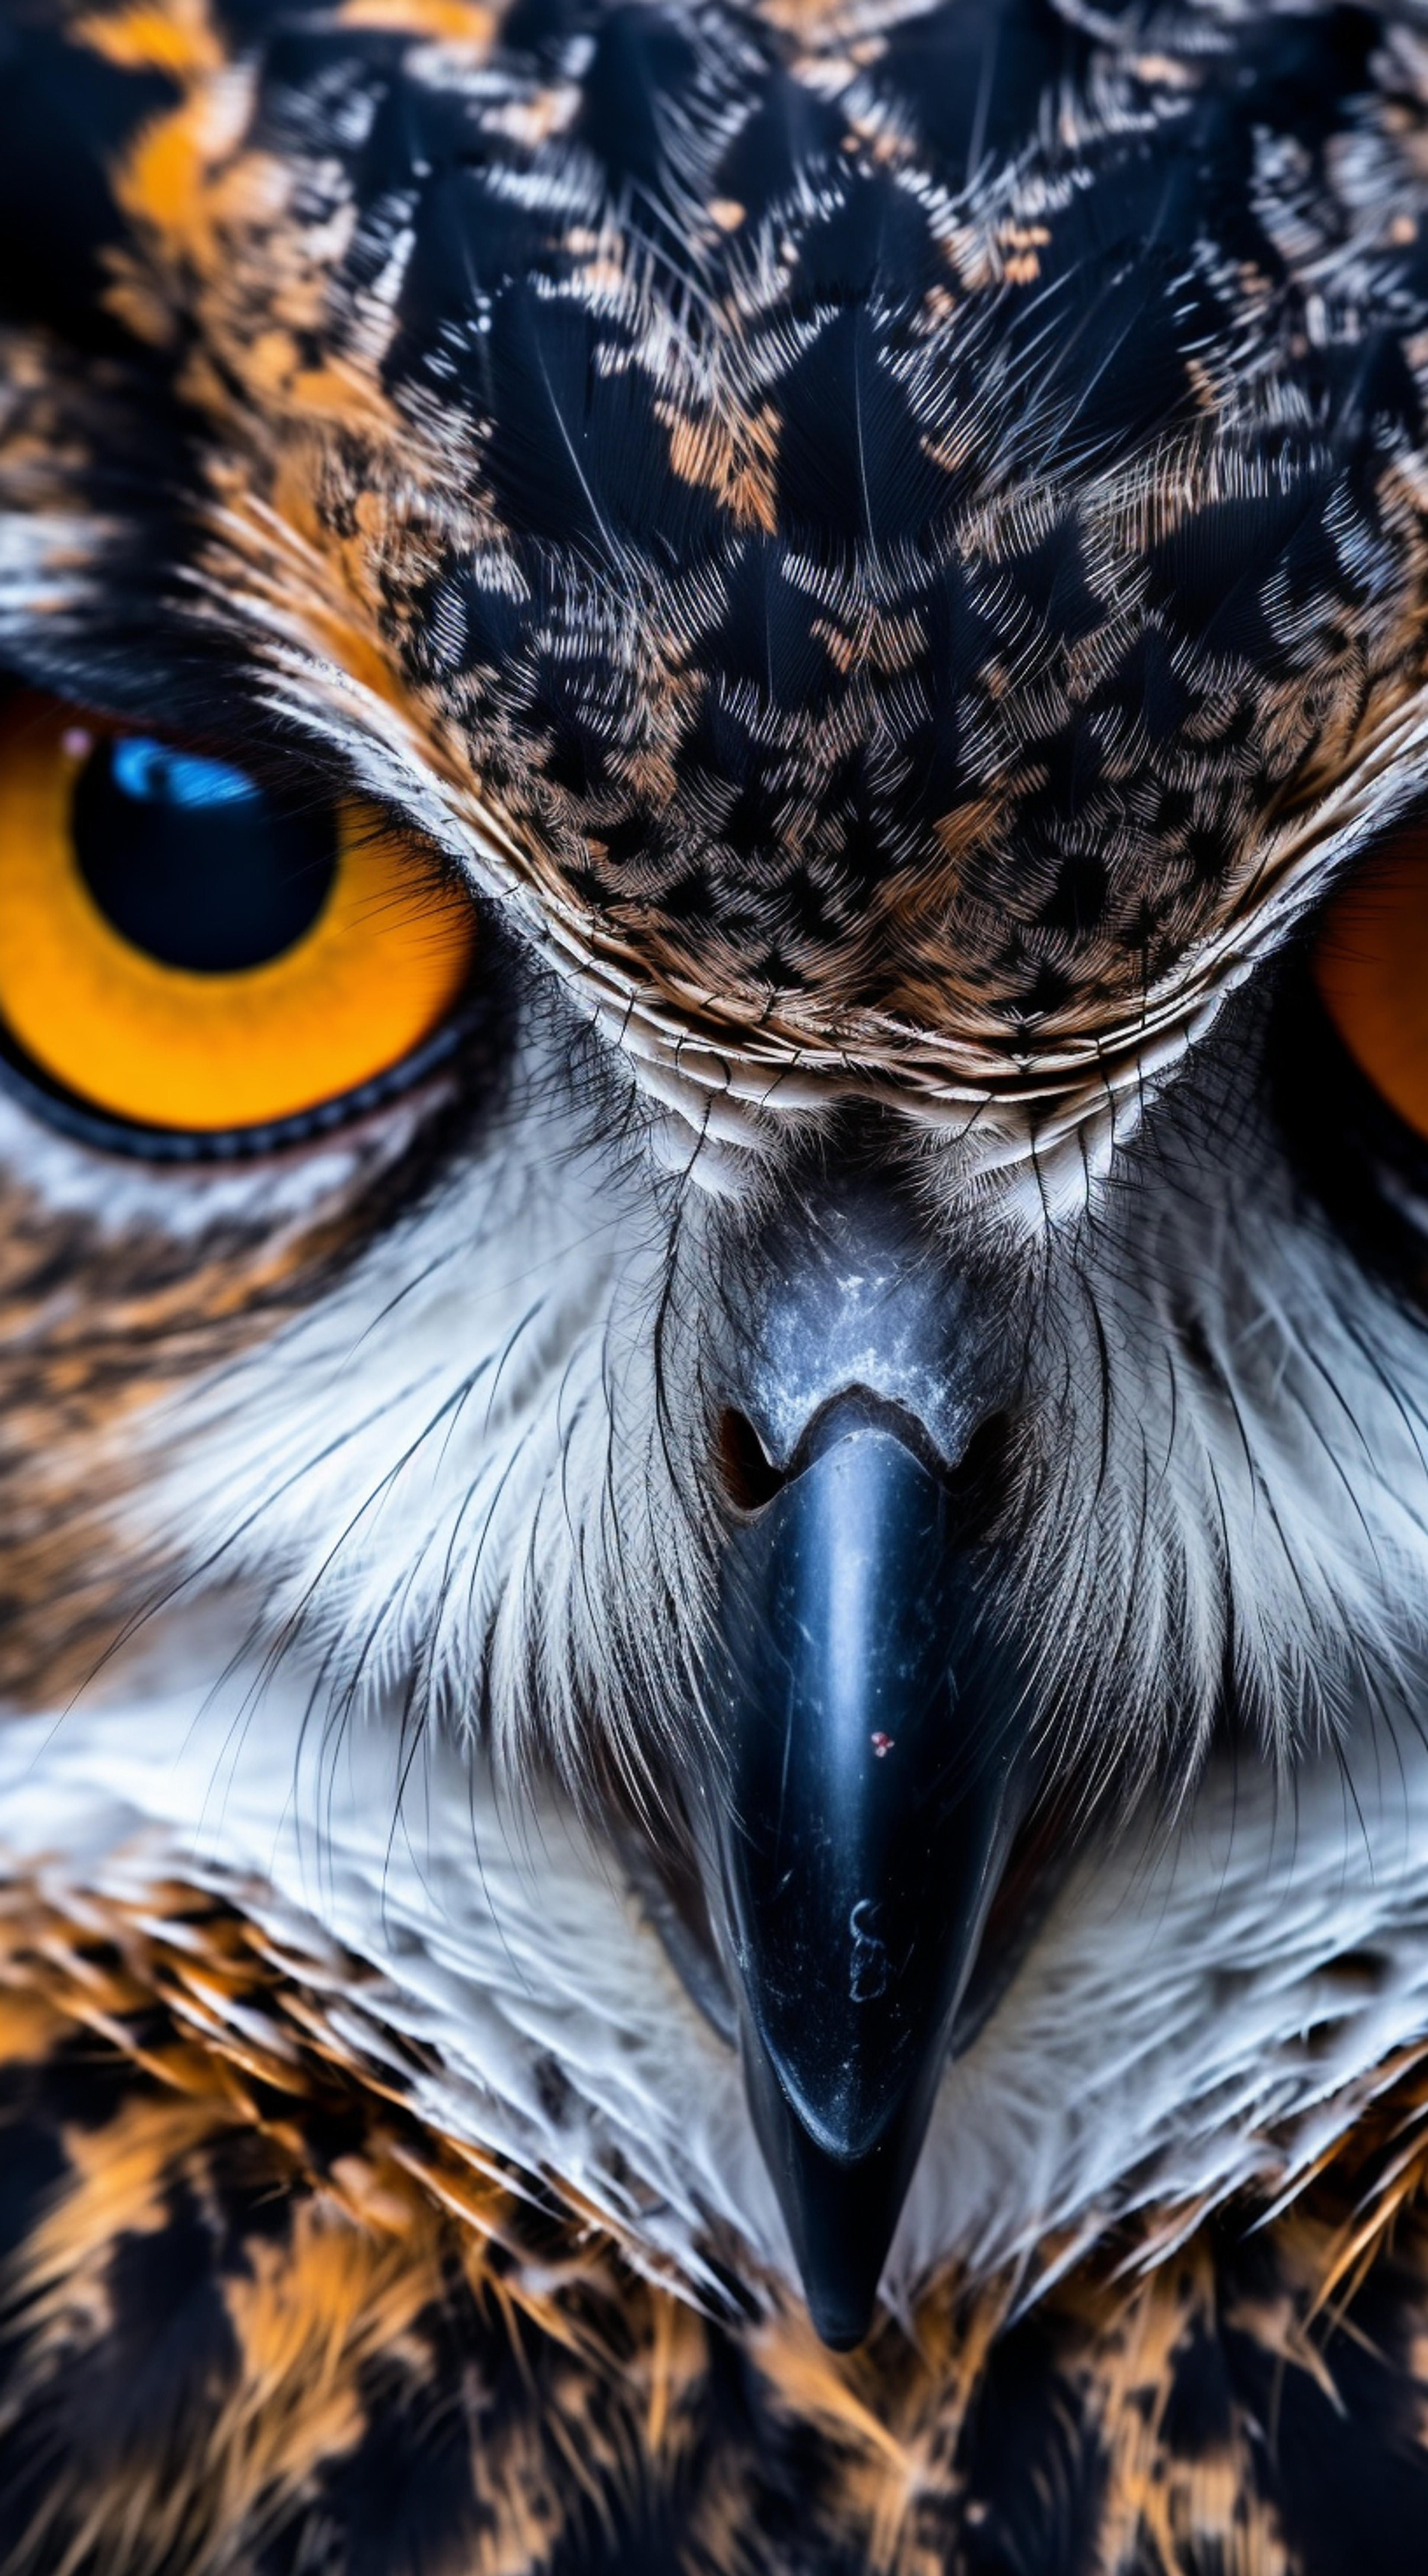 extreme close up of an owl, in the style of nikon d850, uhd image